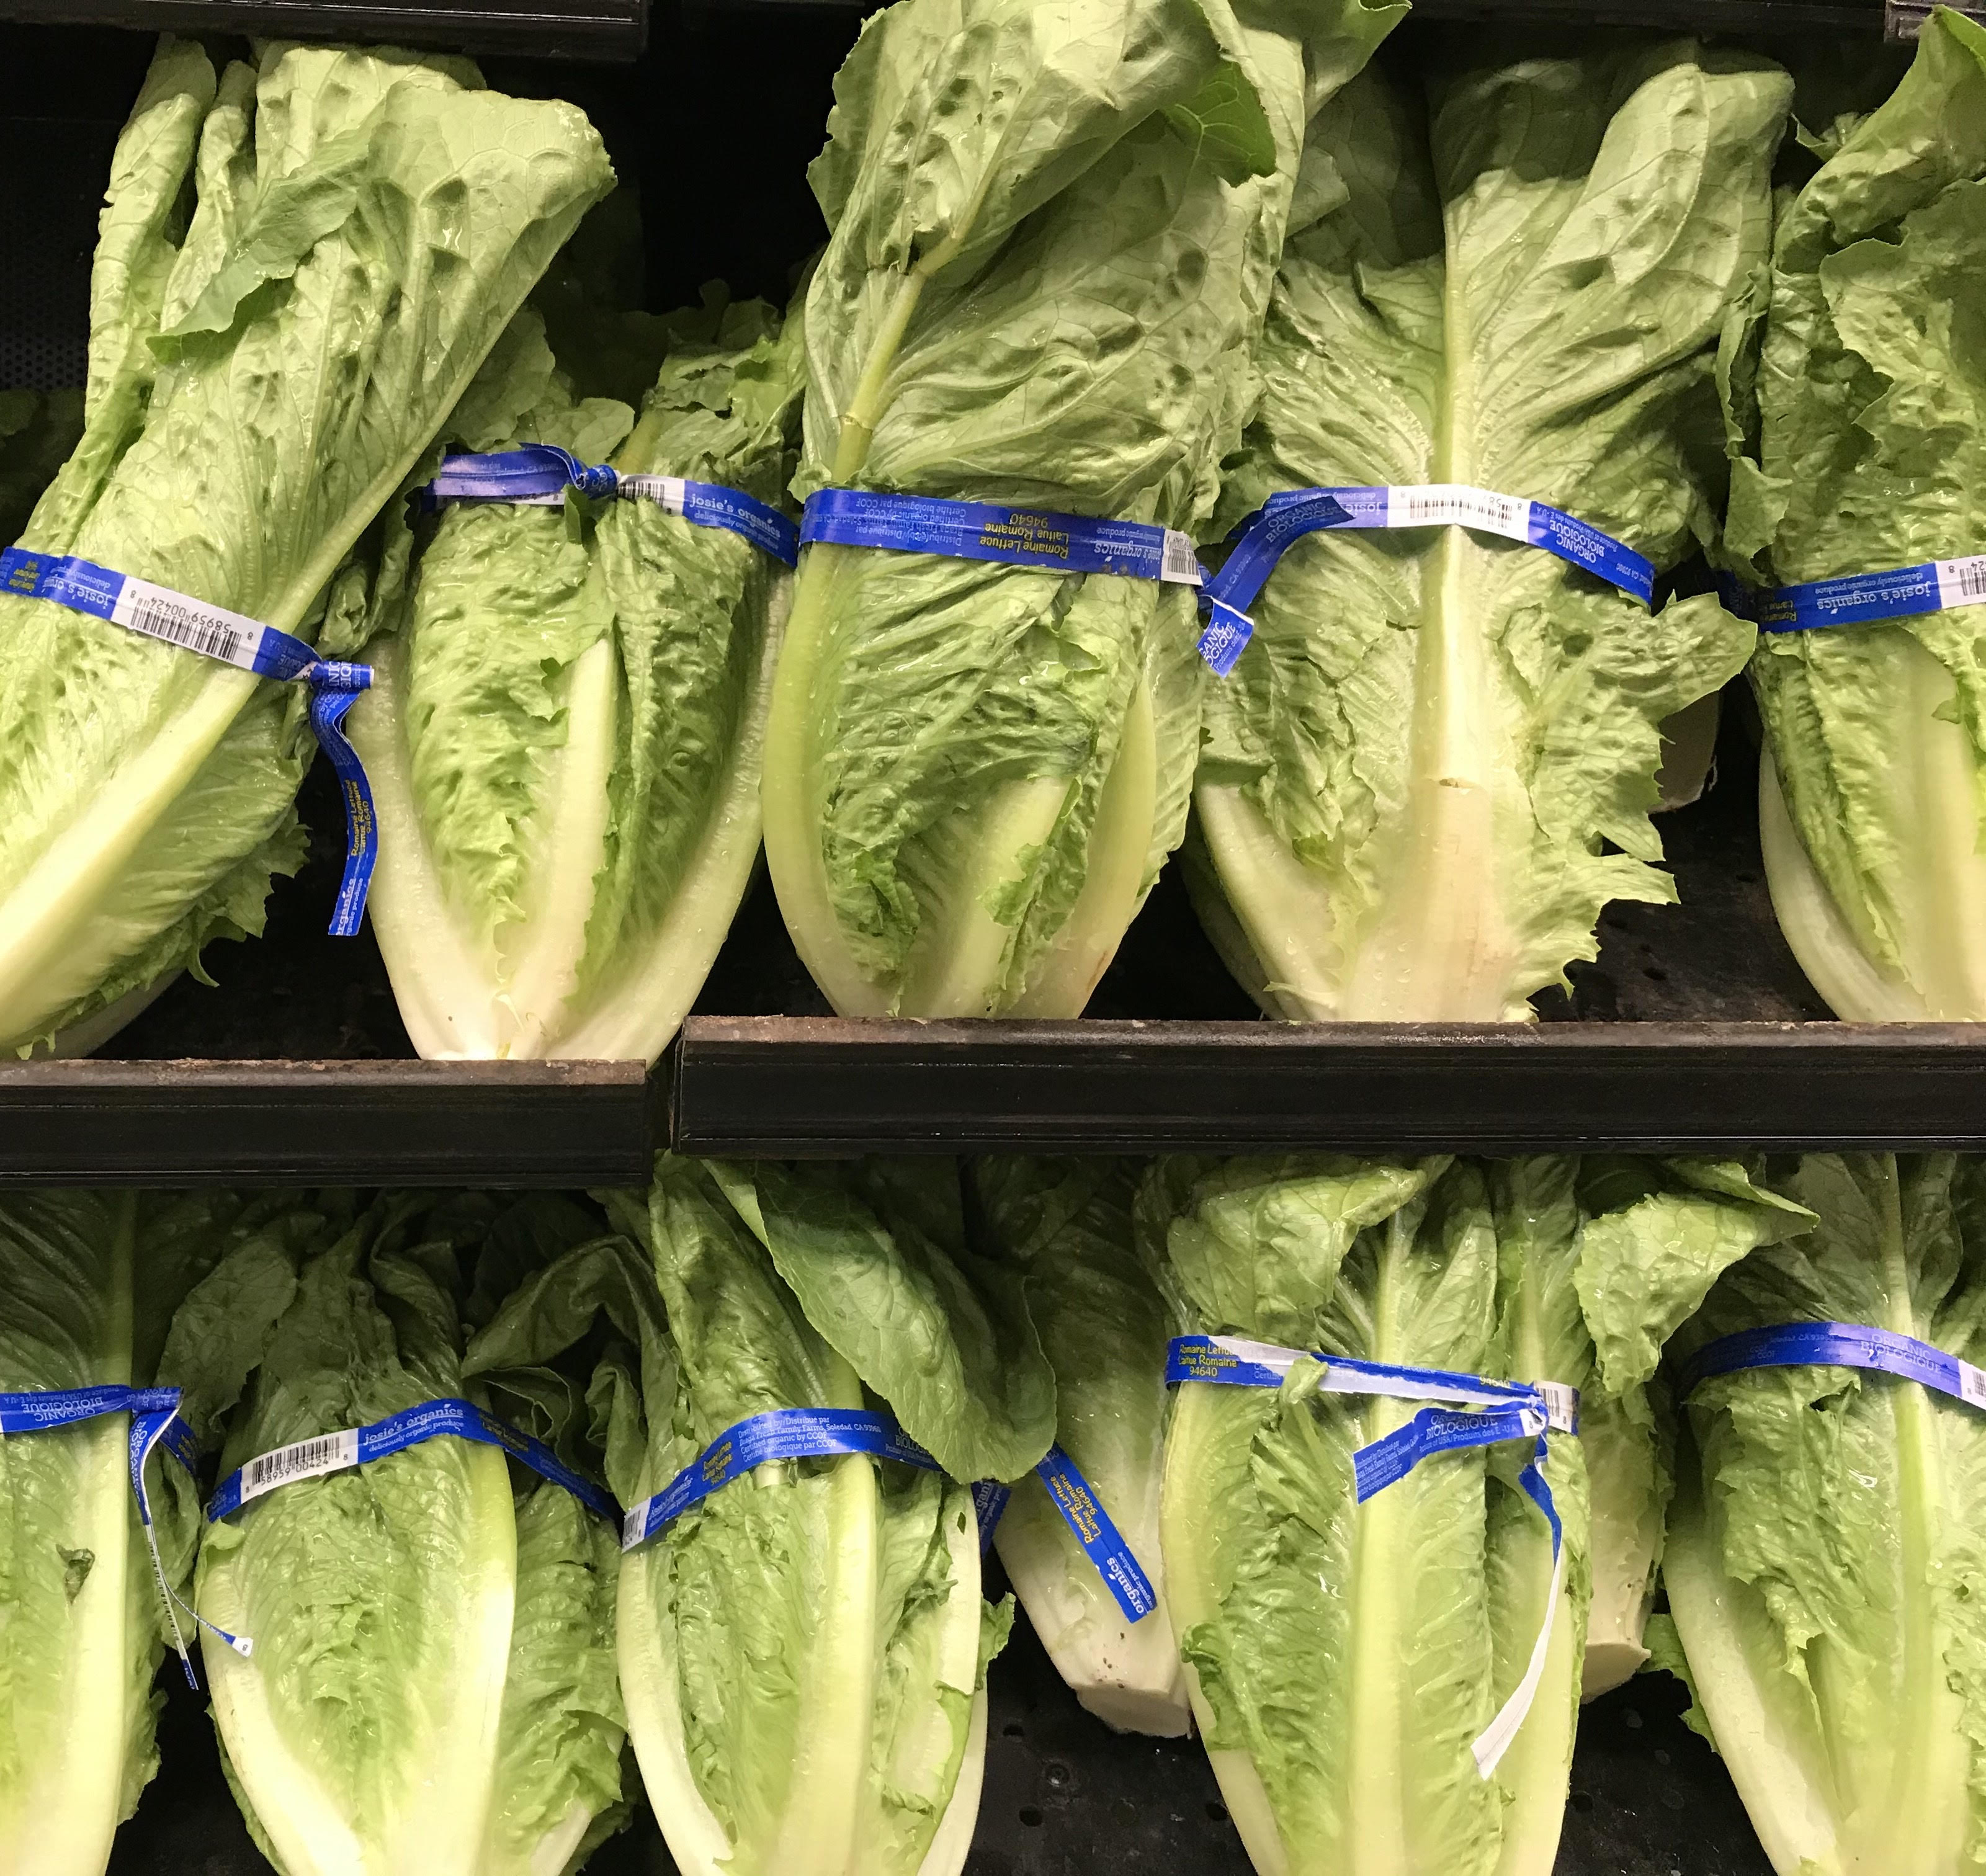 Skip the Salad Romaine Lettuce Recalled After Being Linked to E.coli